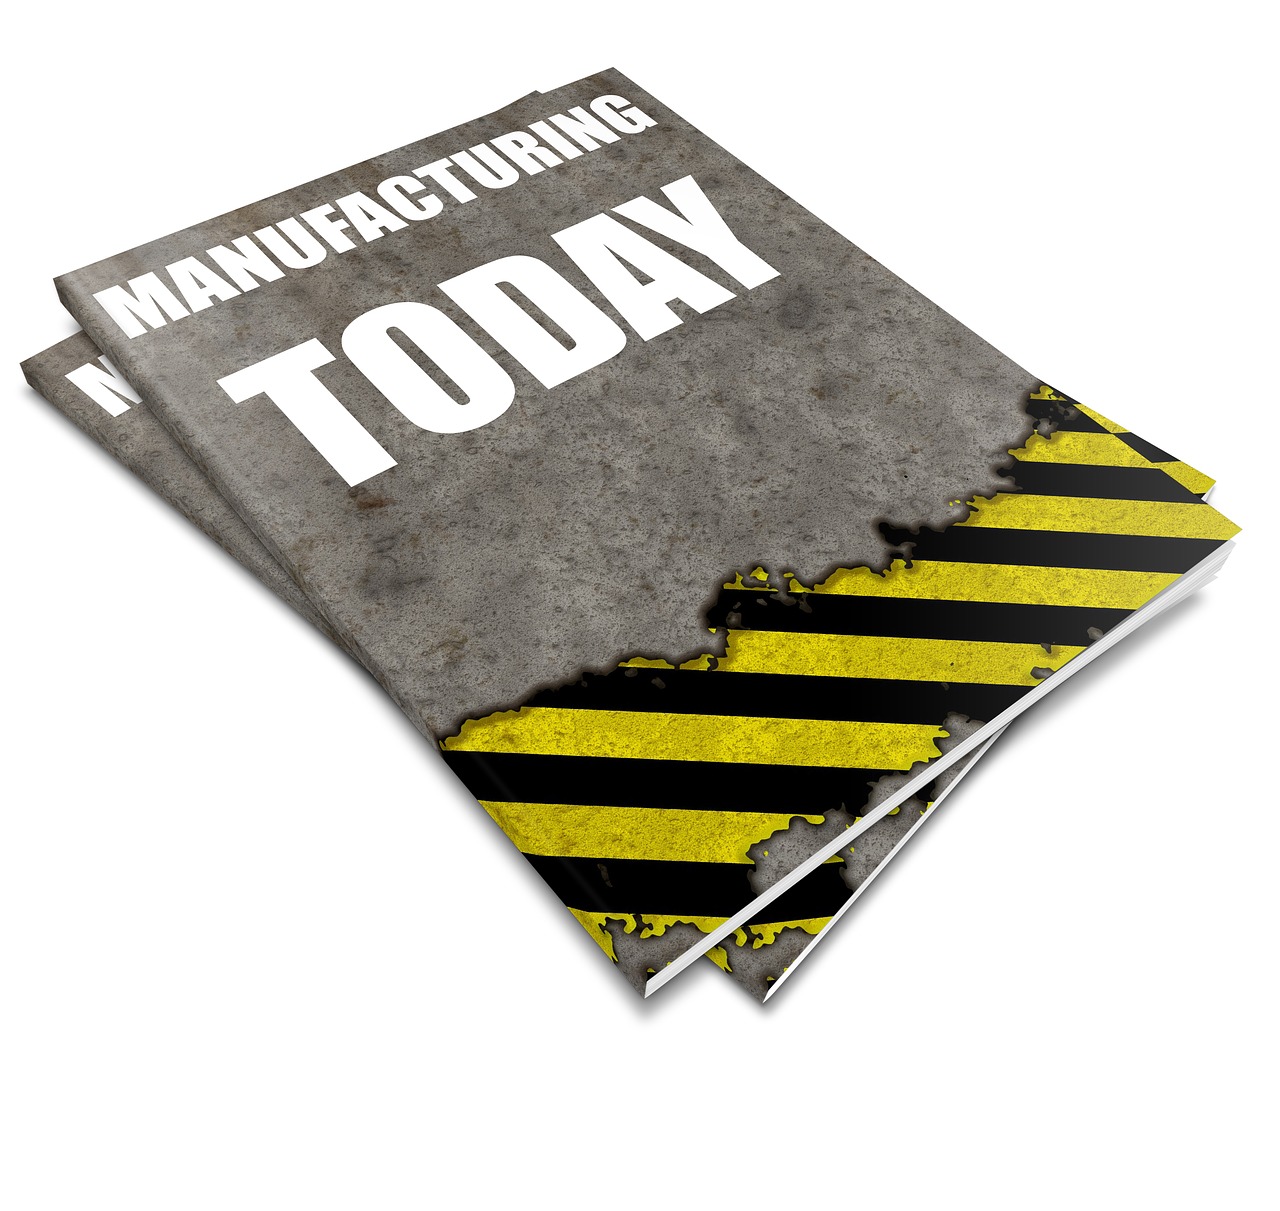 manufacturing industry report free photo